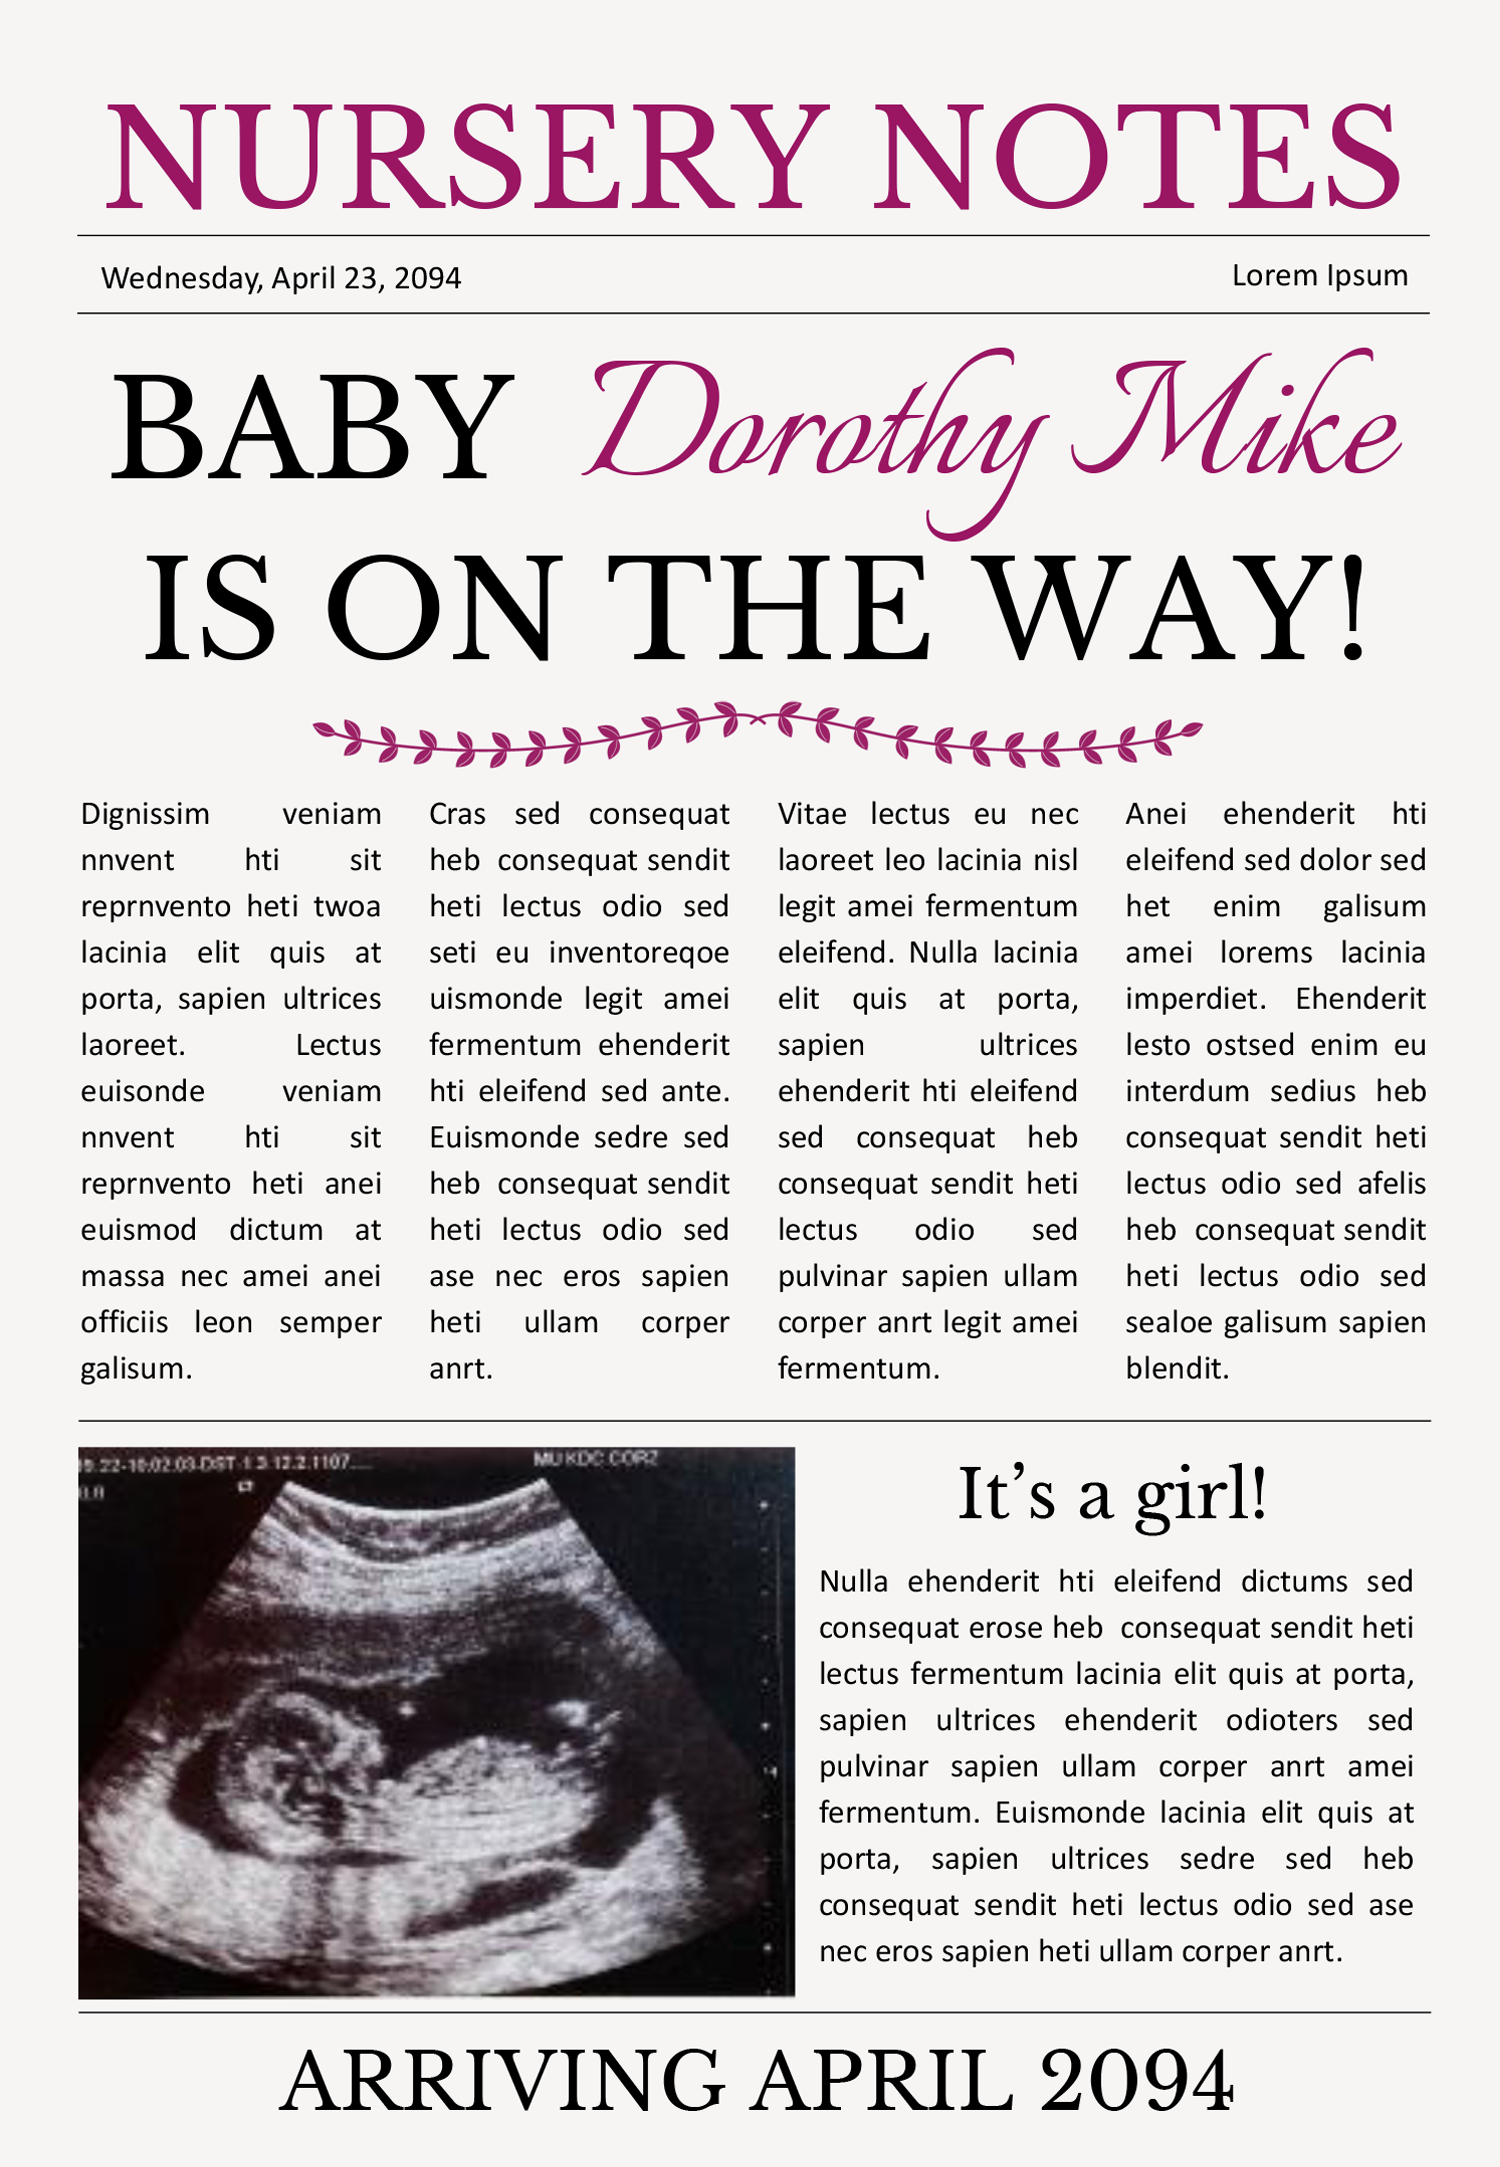 A4 Newspaper Pregnancy Announcement - Front Page